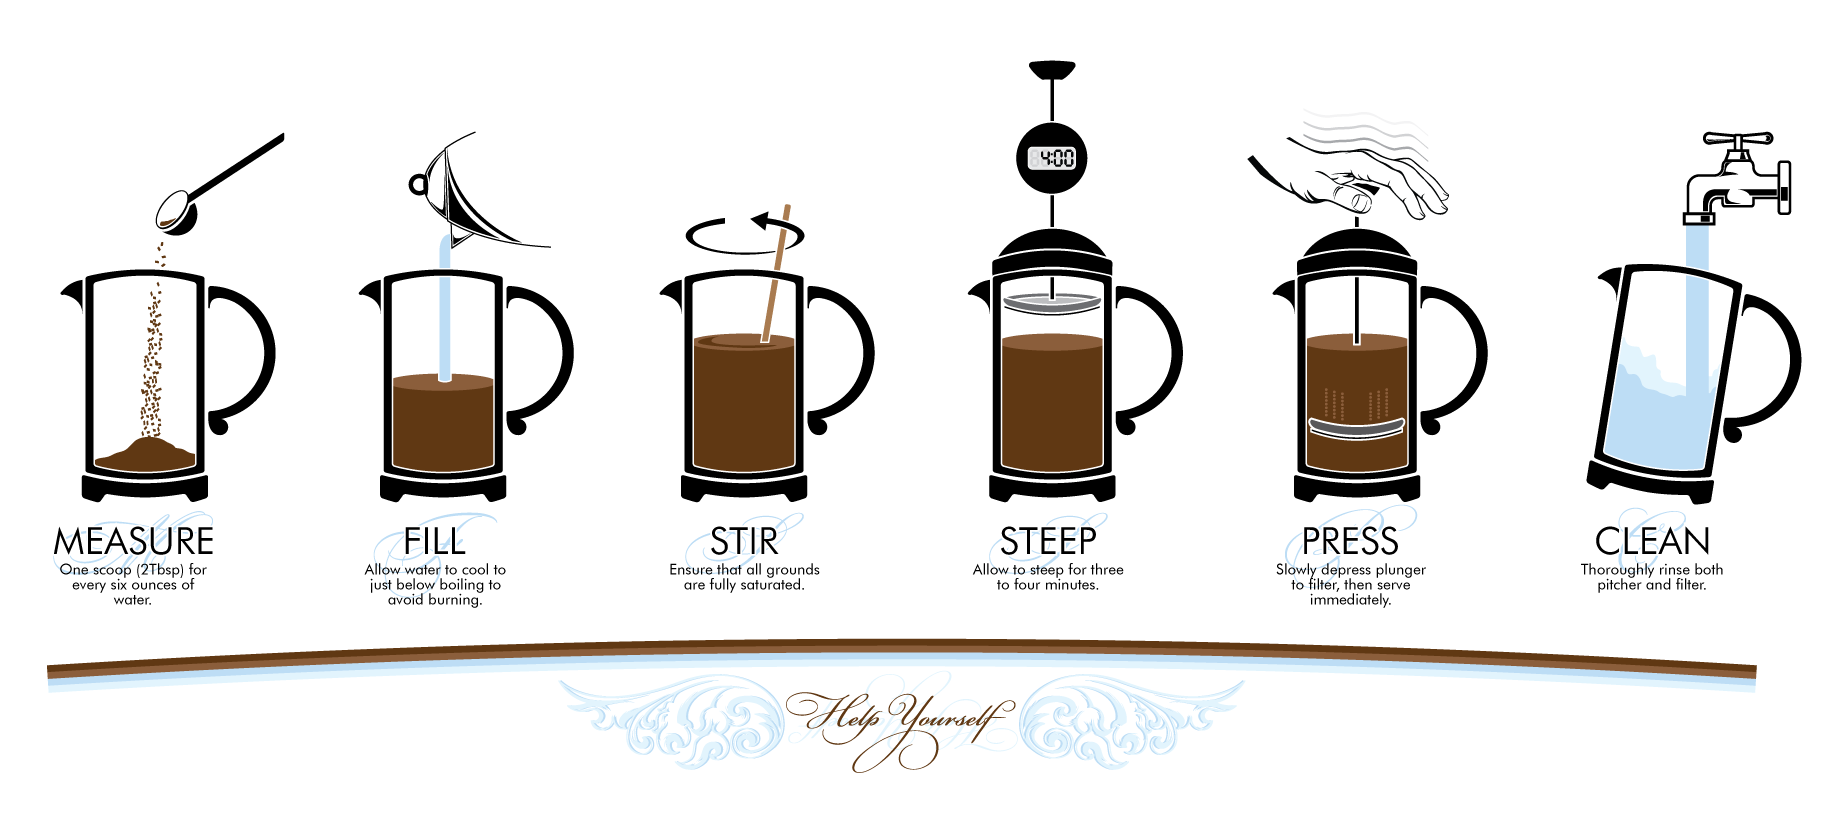 Best Coffee for French Press - All You Need to Know in 2022